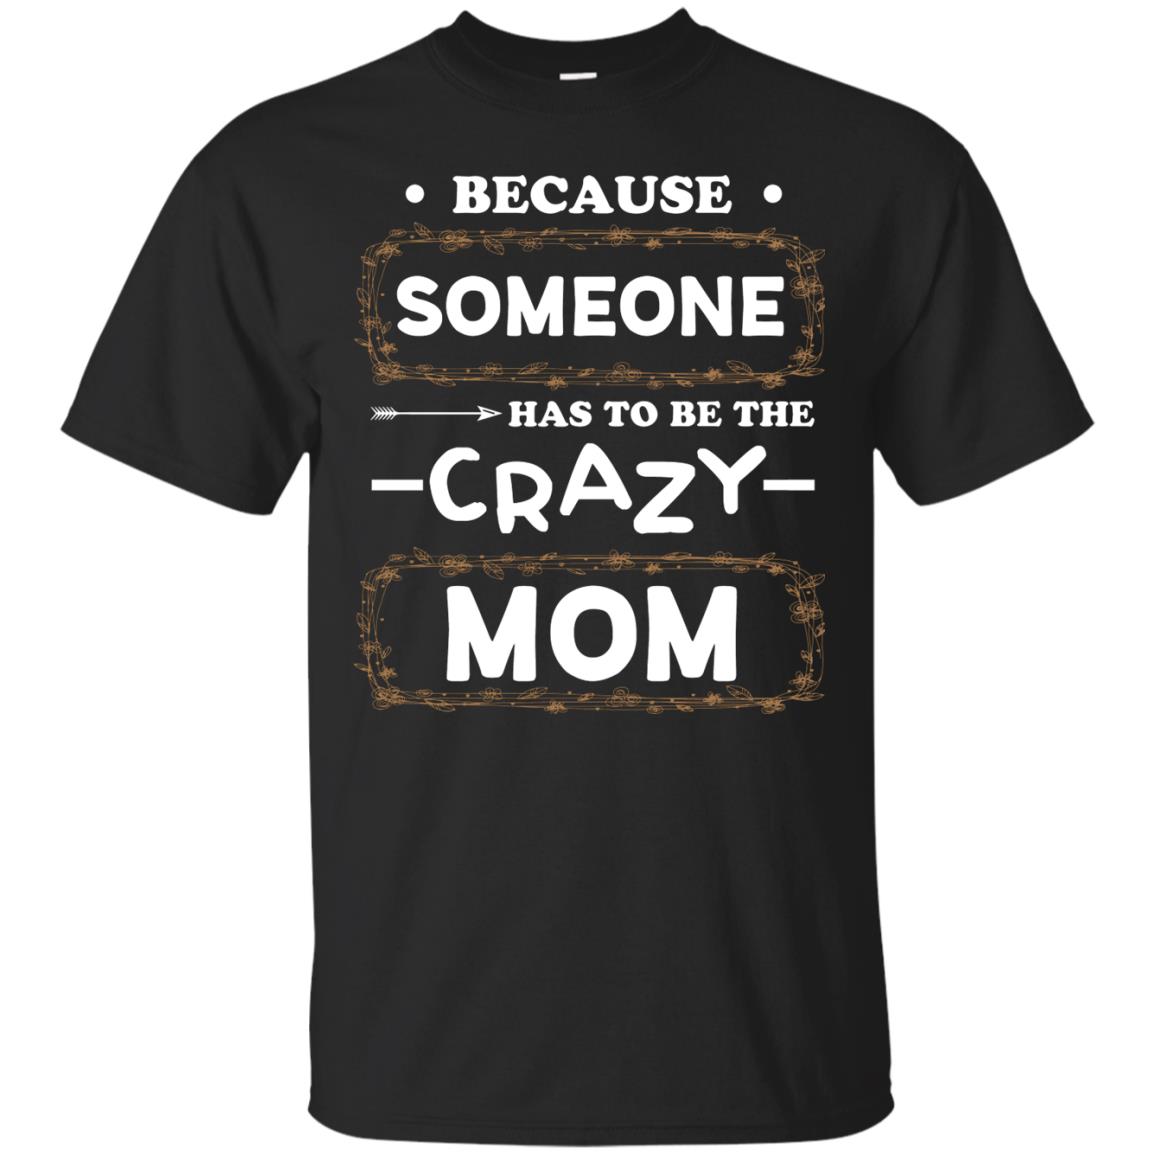 Because Someone Has To Be The Crazy Mom Shirt For MommyG200 Gildan Ultra Cotton T-Shirt